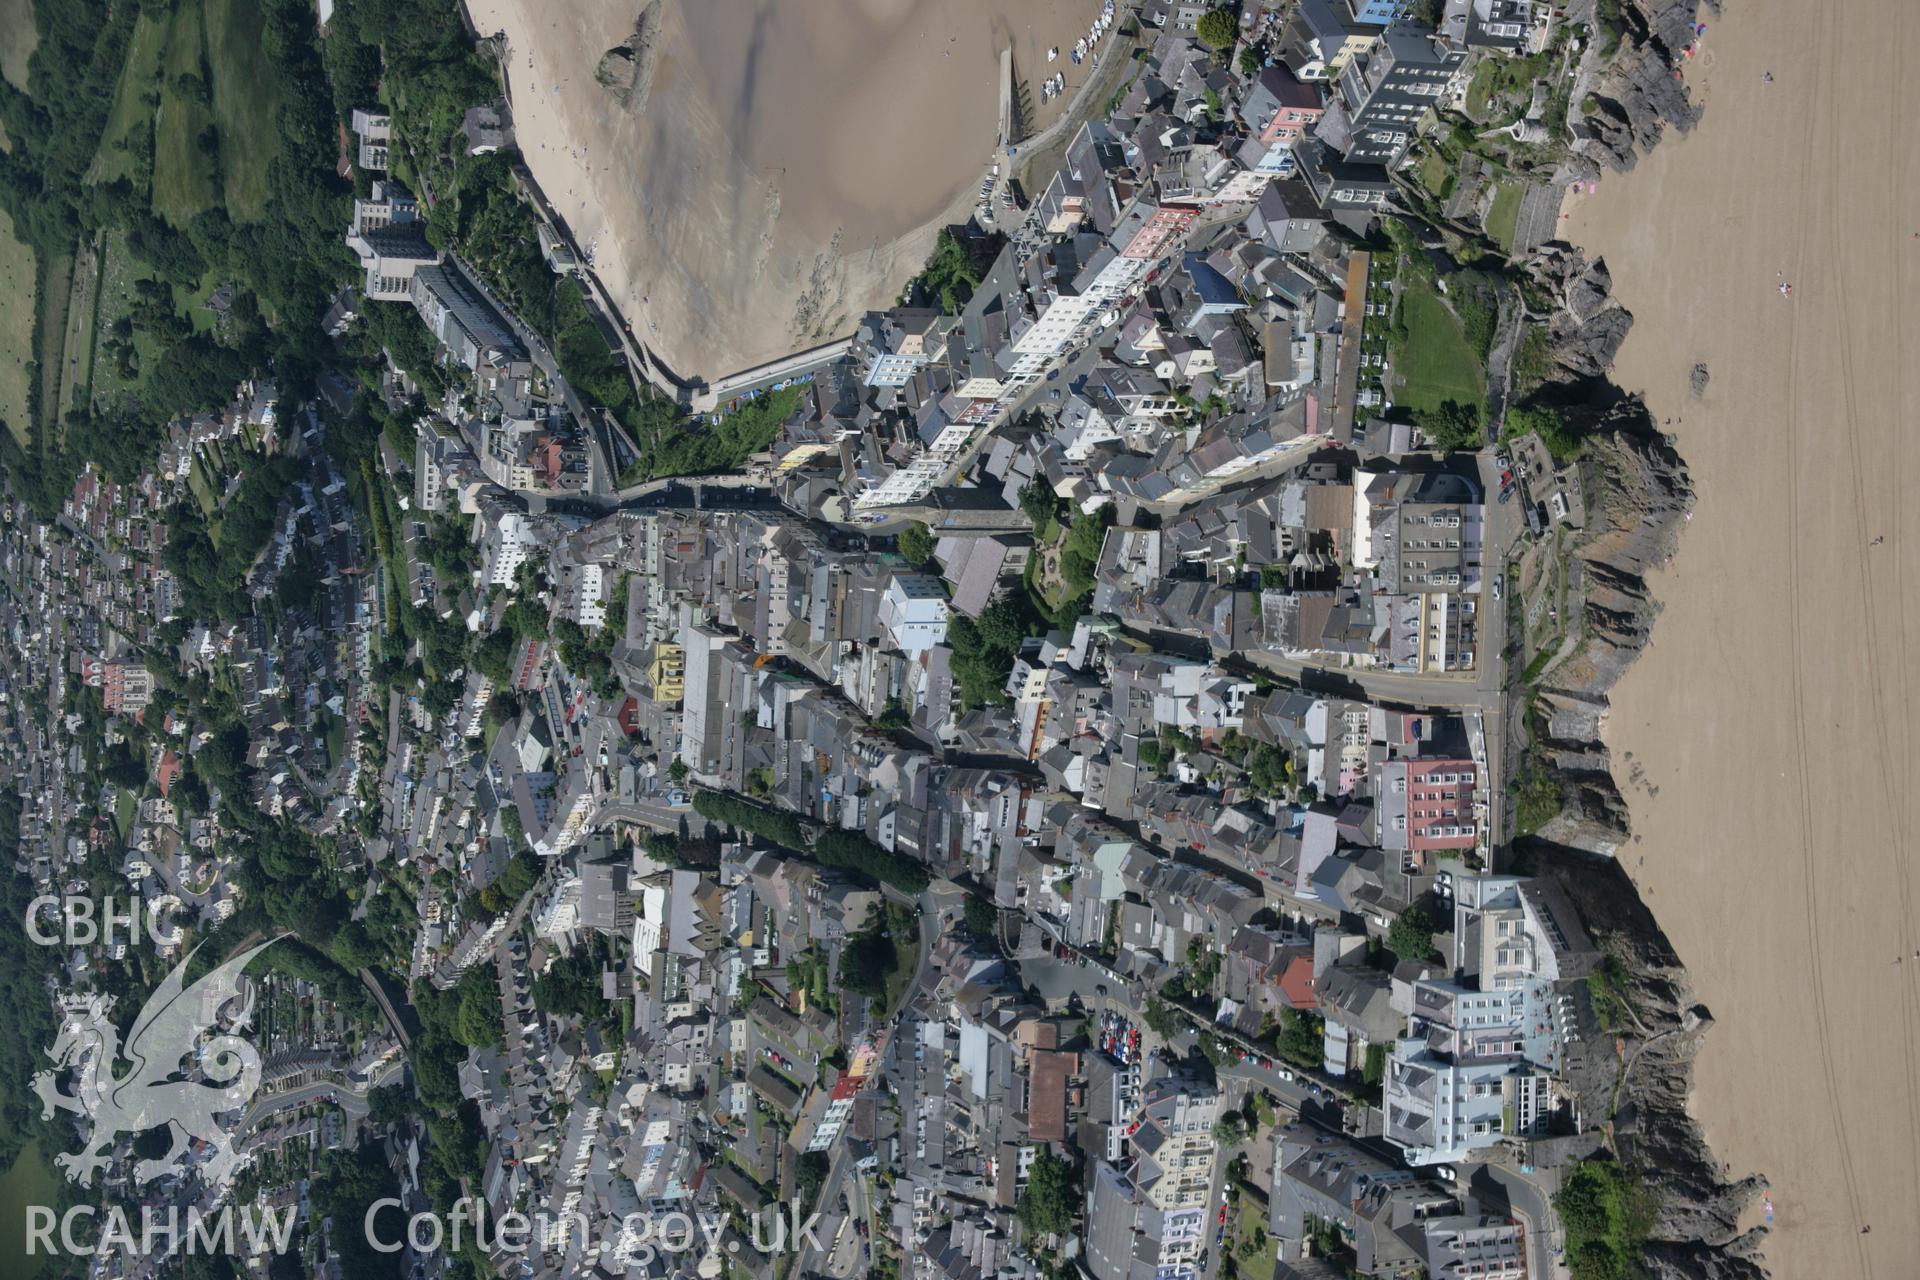 RCAHMW colour oblique aerial photograph of Tenby showing the town and its walls from the south-east. Taken on 22 June 2005 by Toby Driver